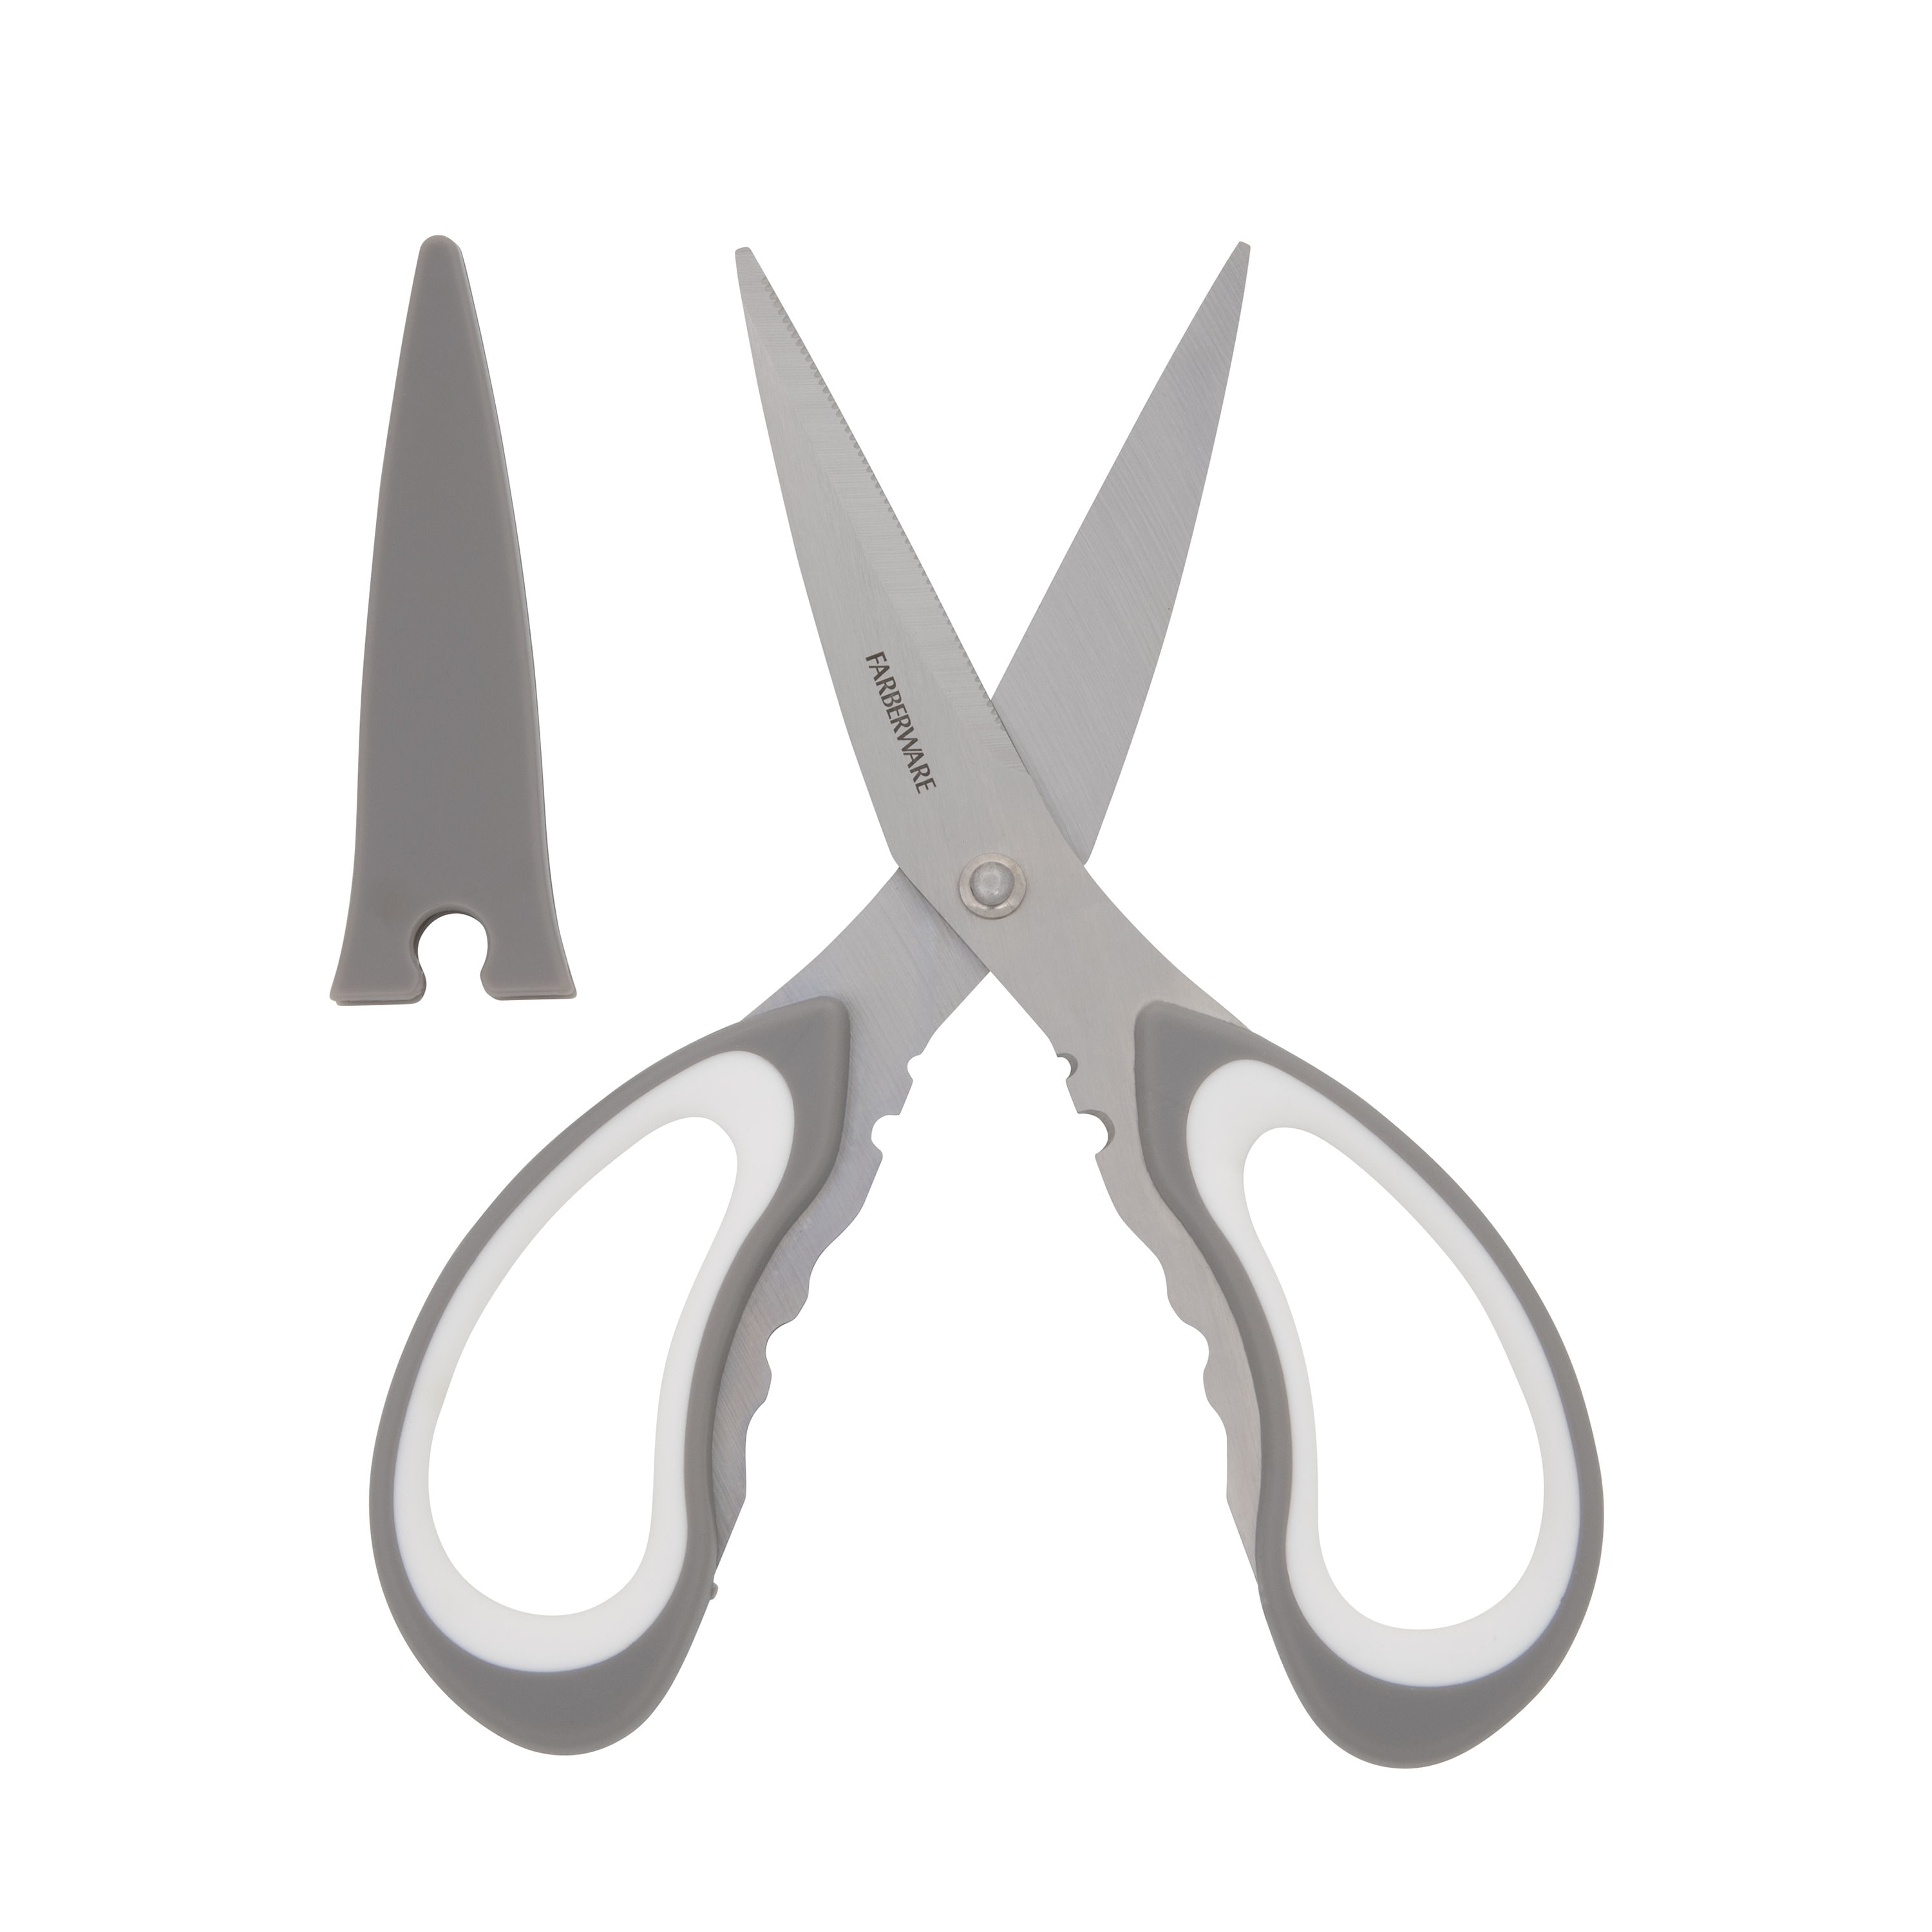 Farberware 4 in 1 Stainless Steel Scissors with Nonslip Handles, Black and  Gray